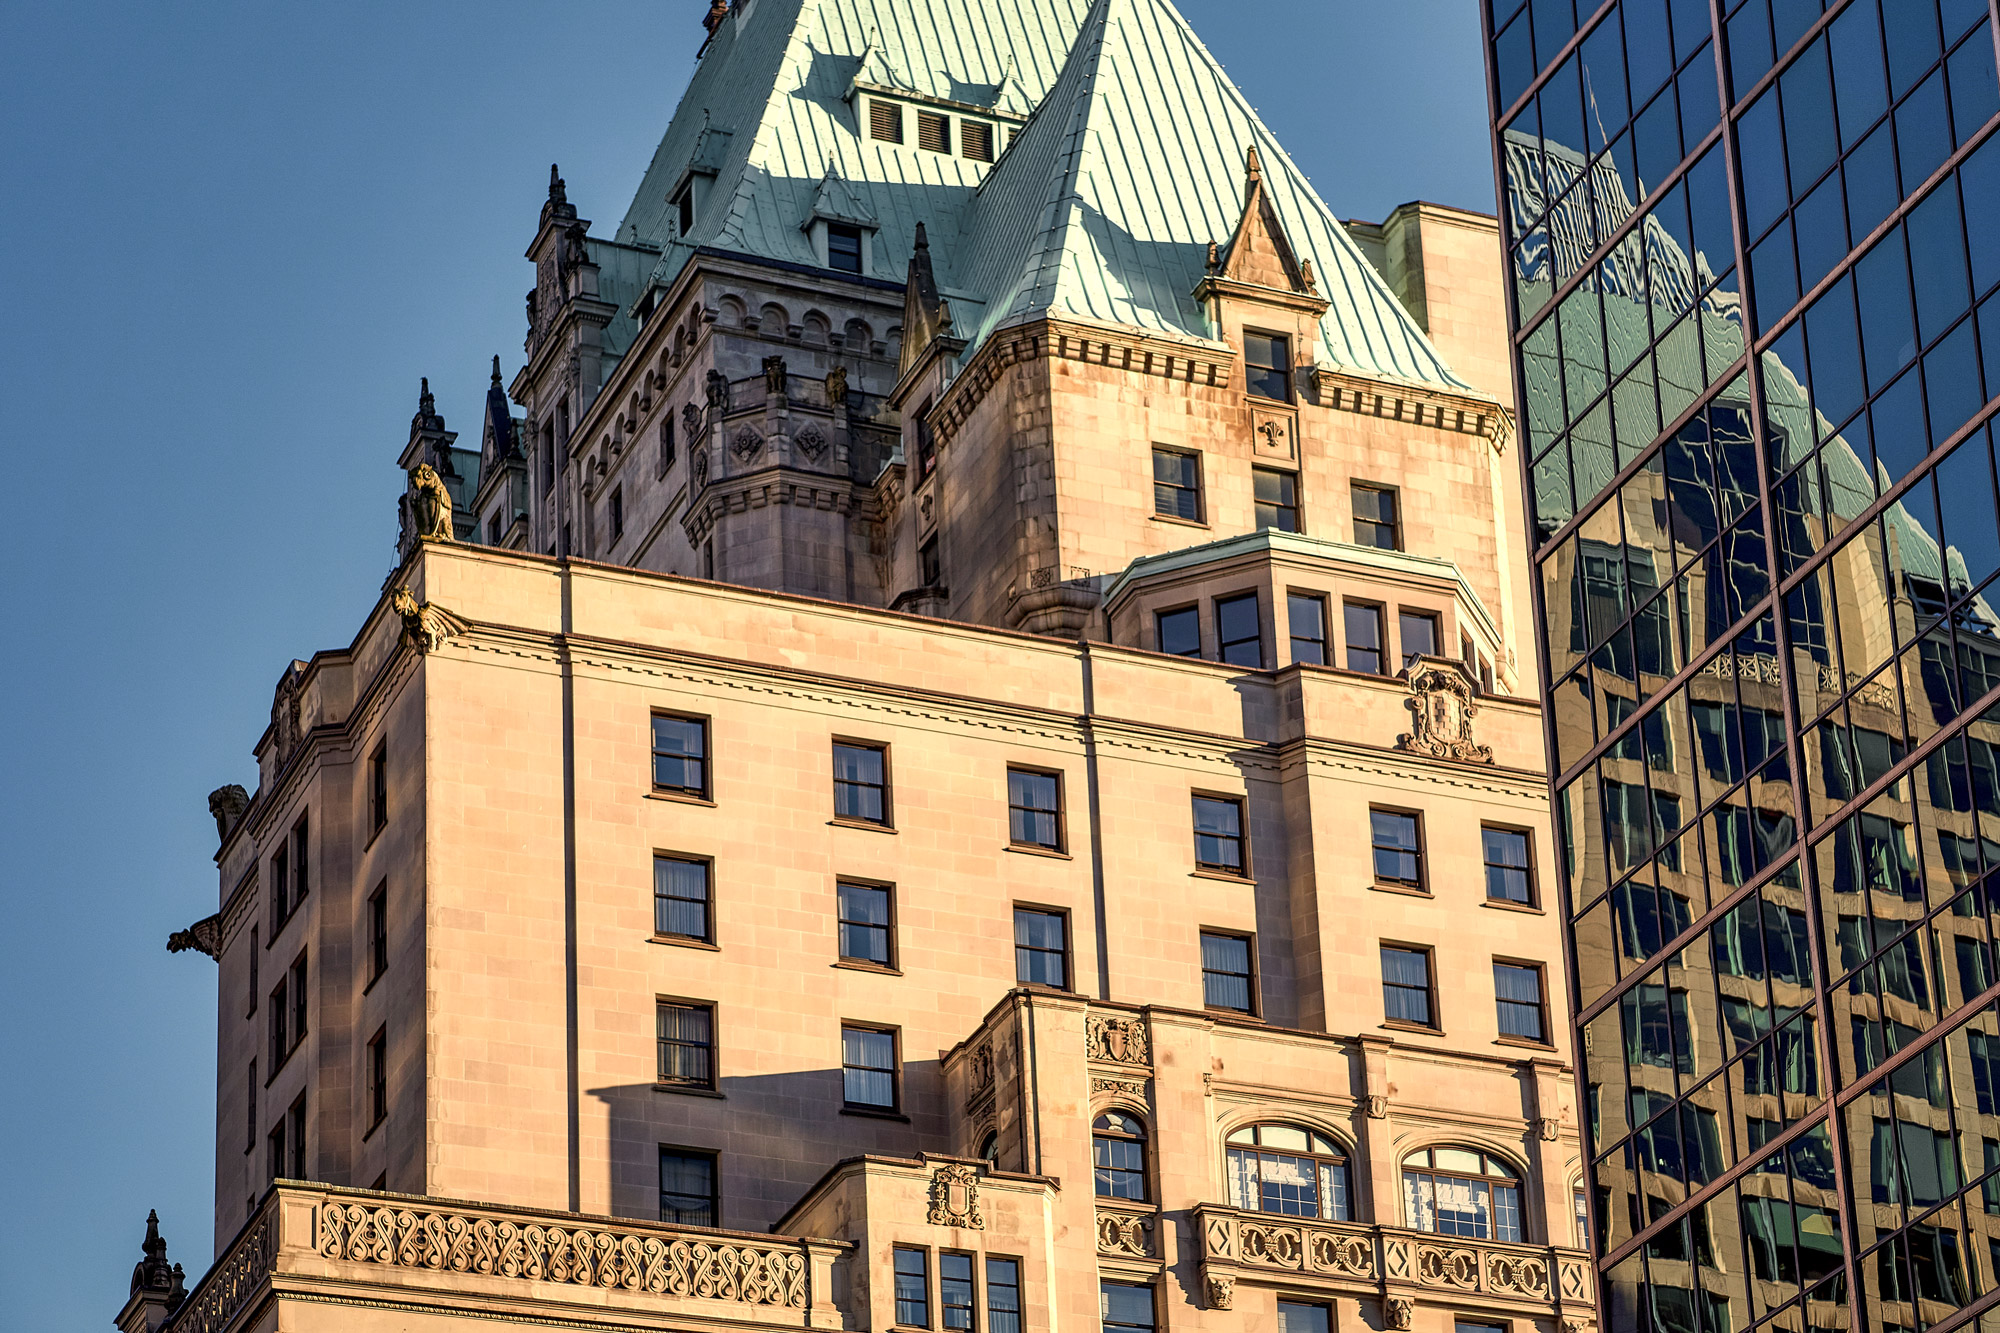 Closeup of the Fairmont Hotel, Vancouver, with its green copper roof